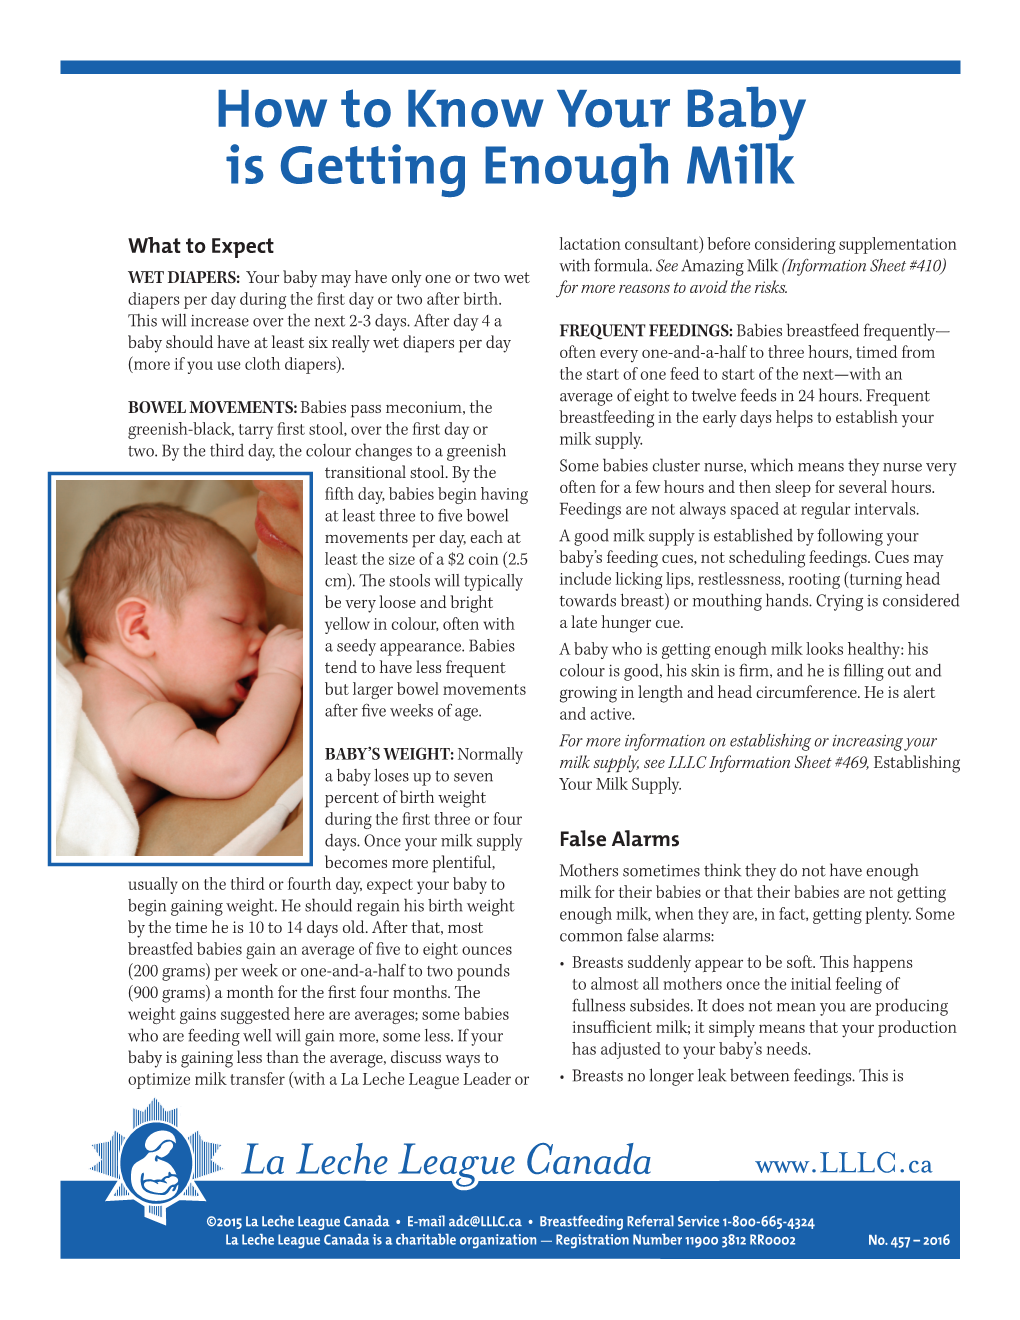 How to Know Your Baby Is Getting Enough Milk